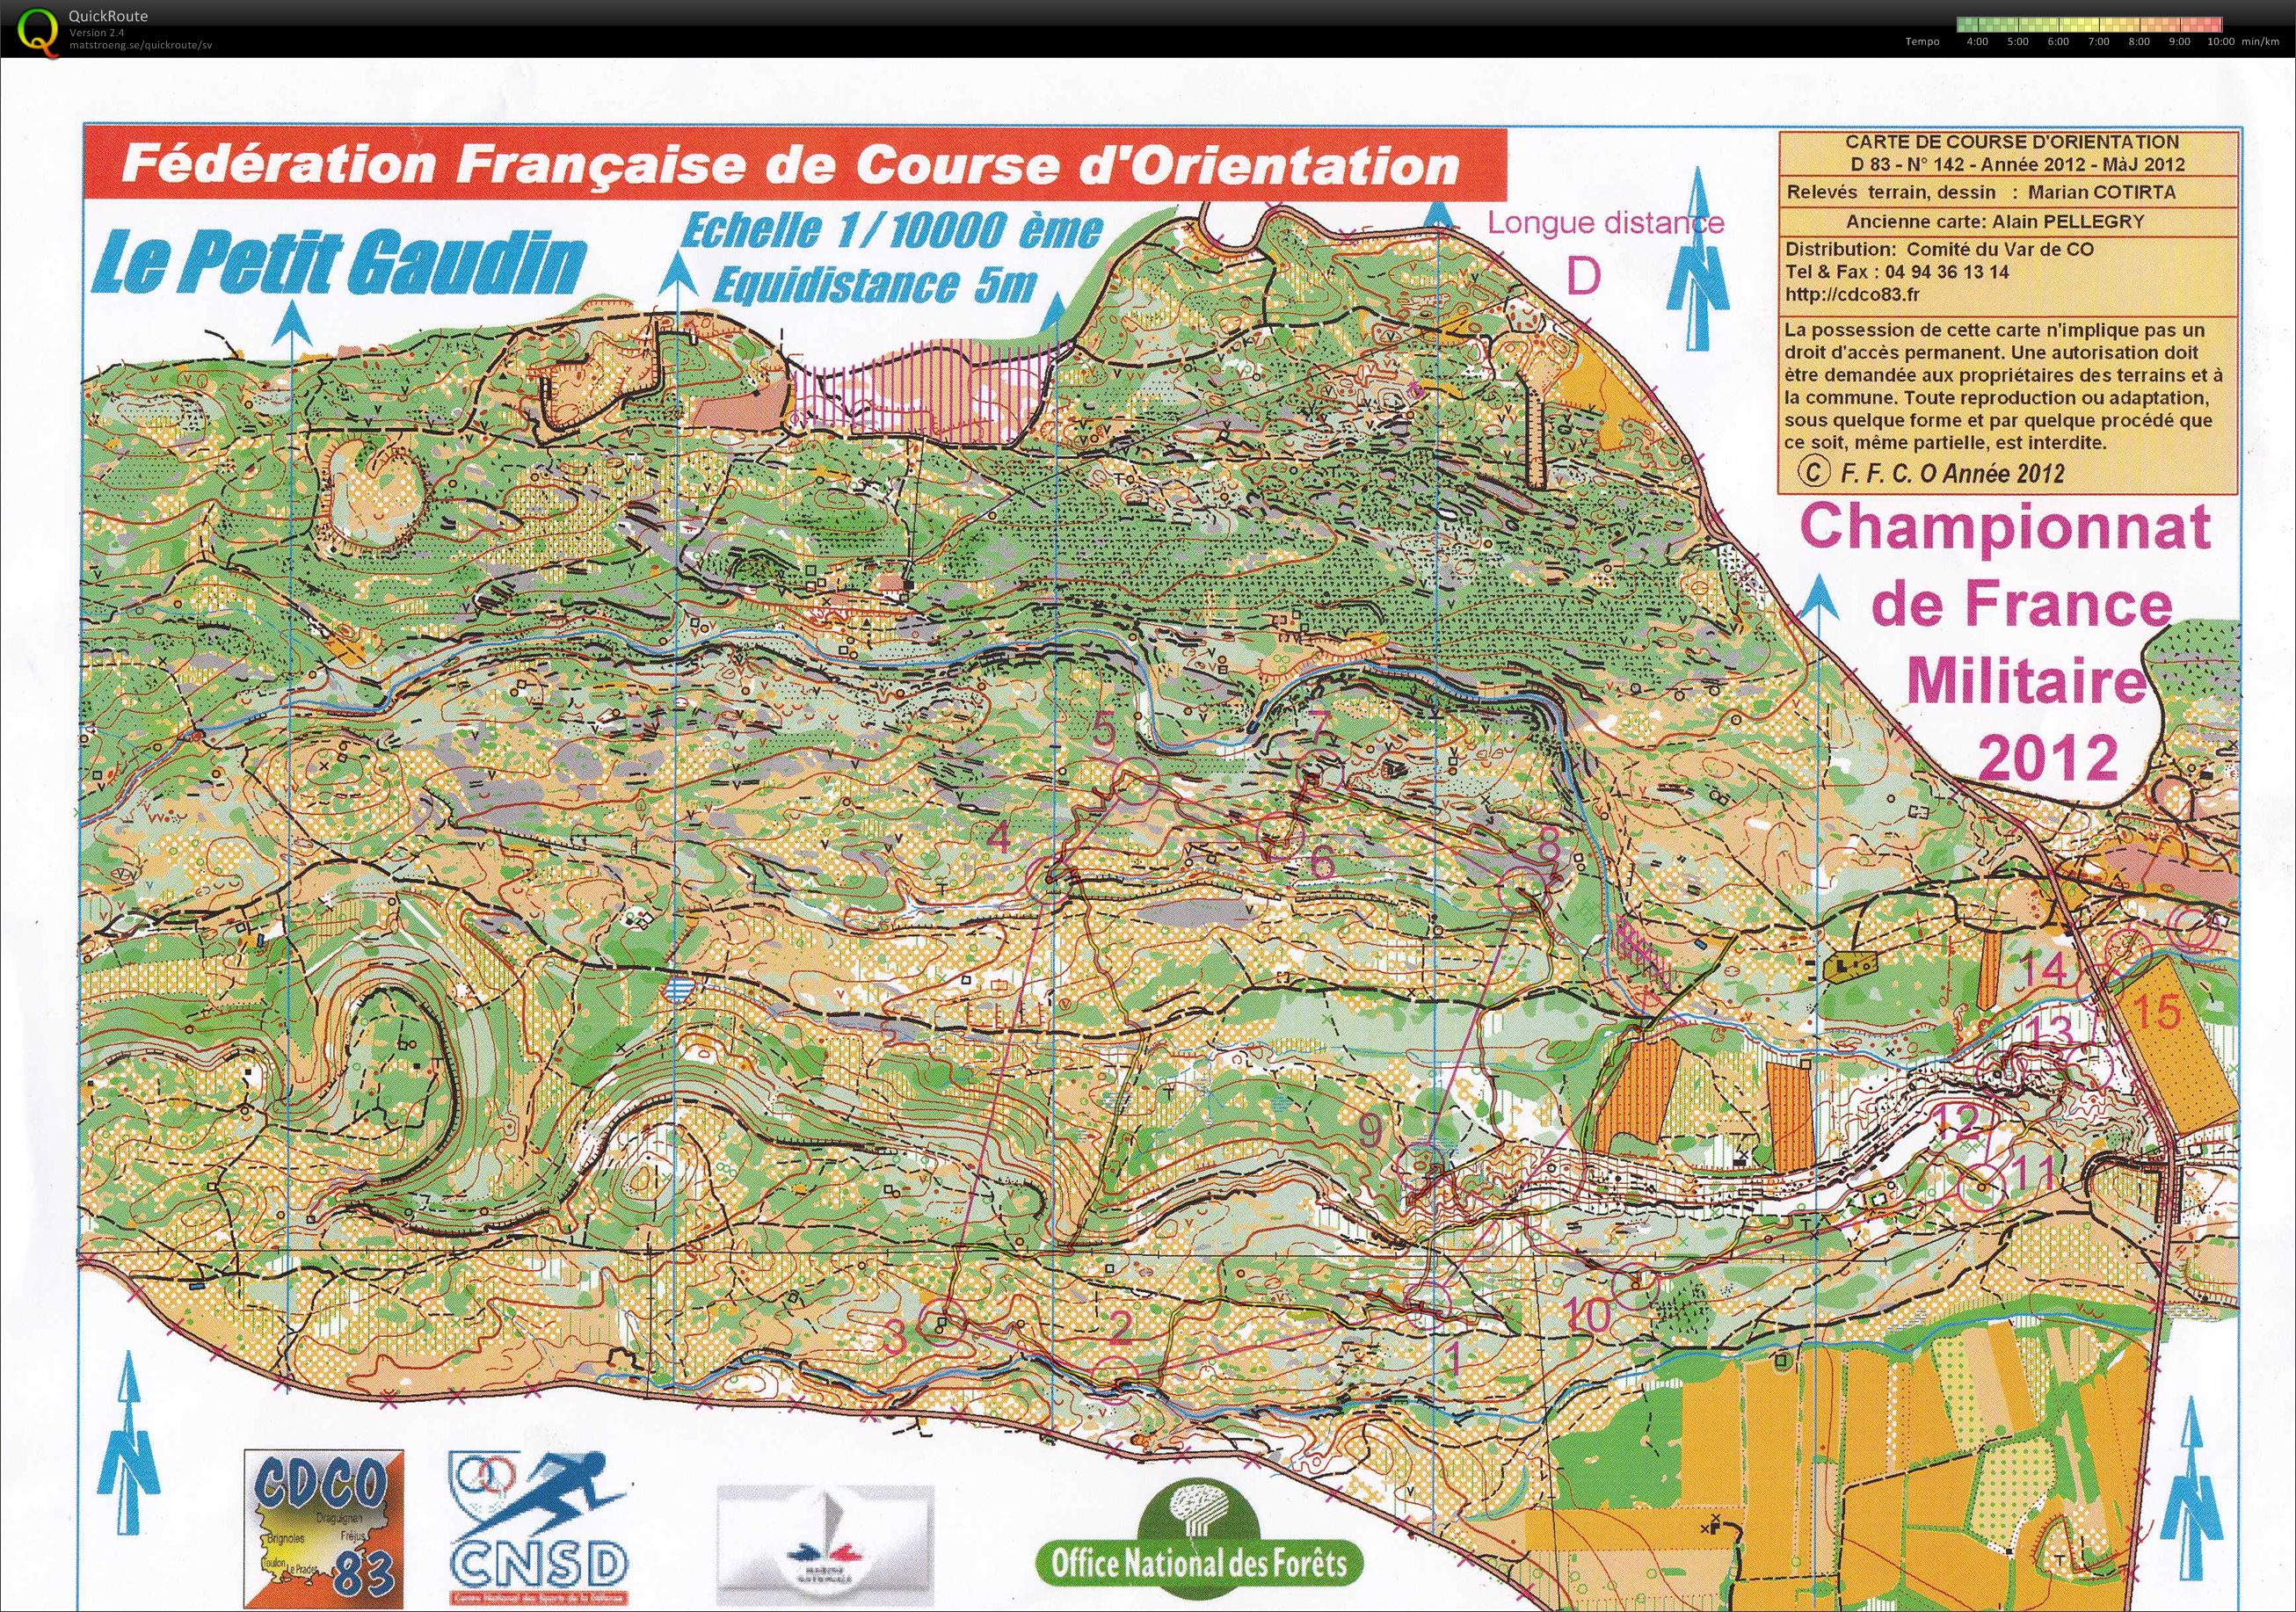 Open race after French Military long dist champ H60 (11/05/2012)